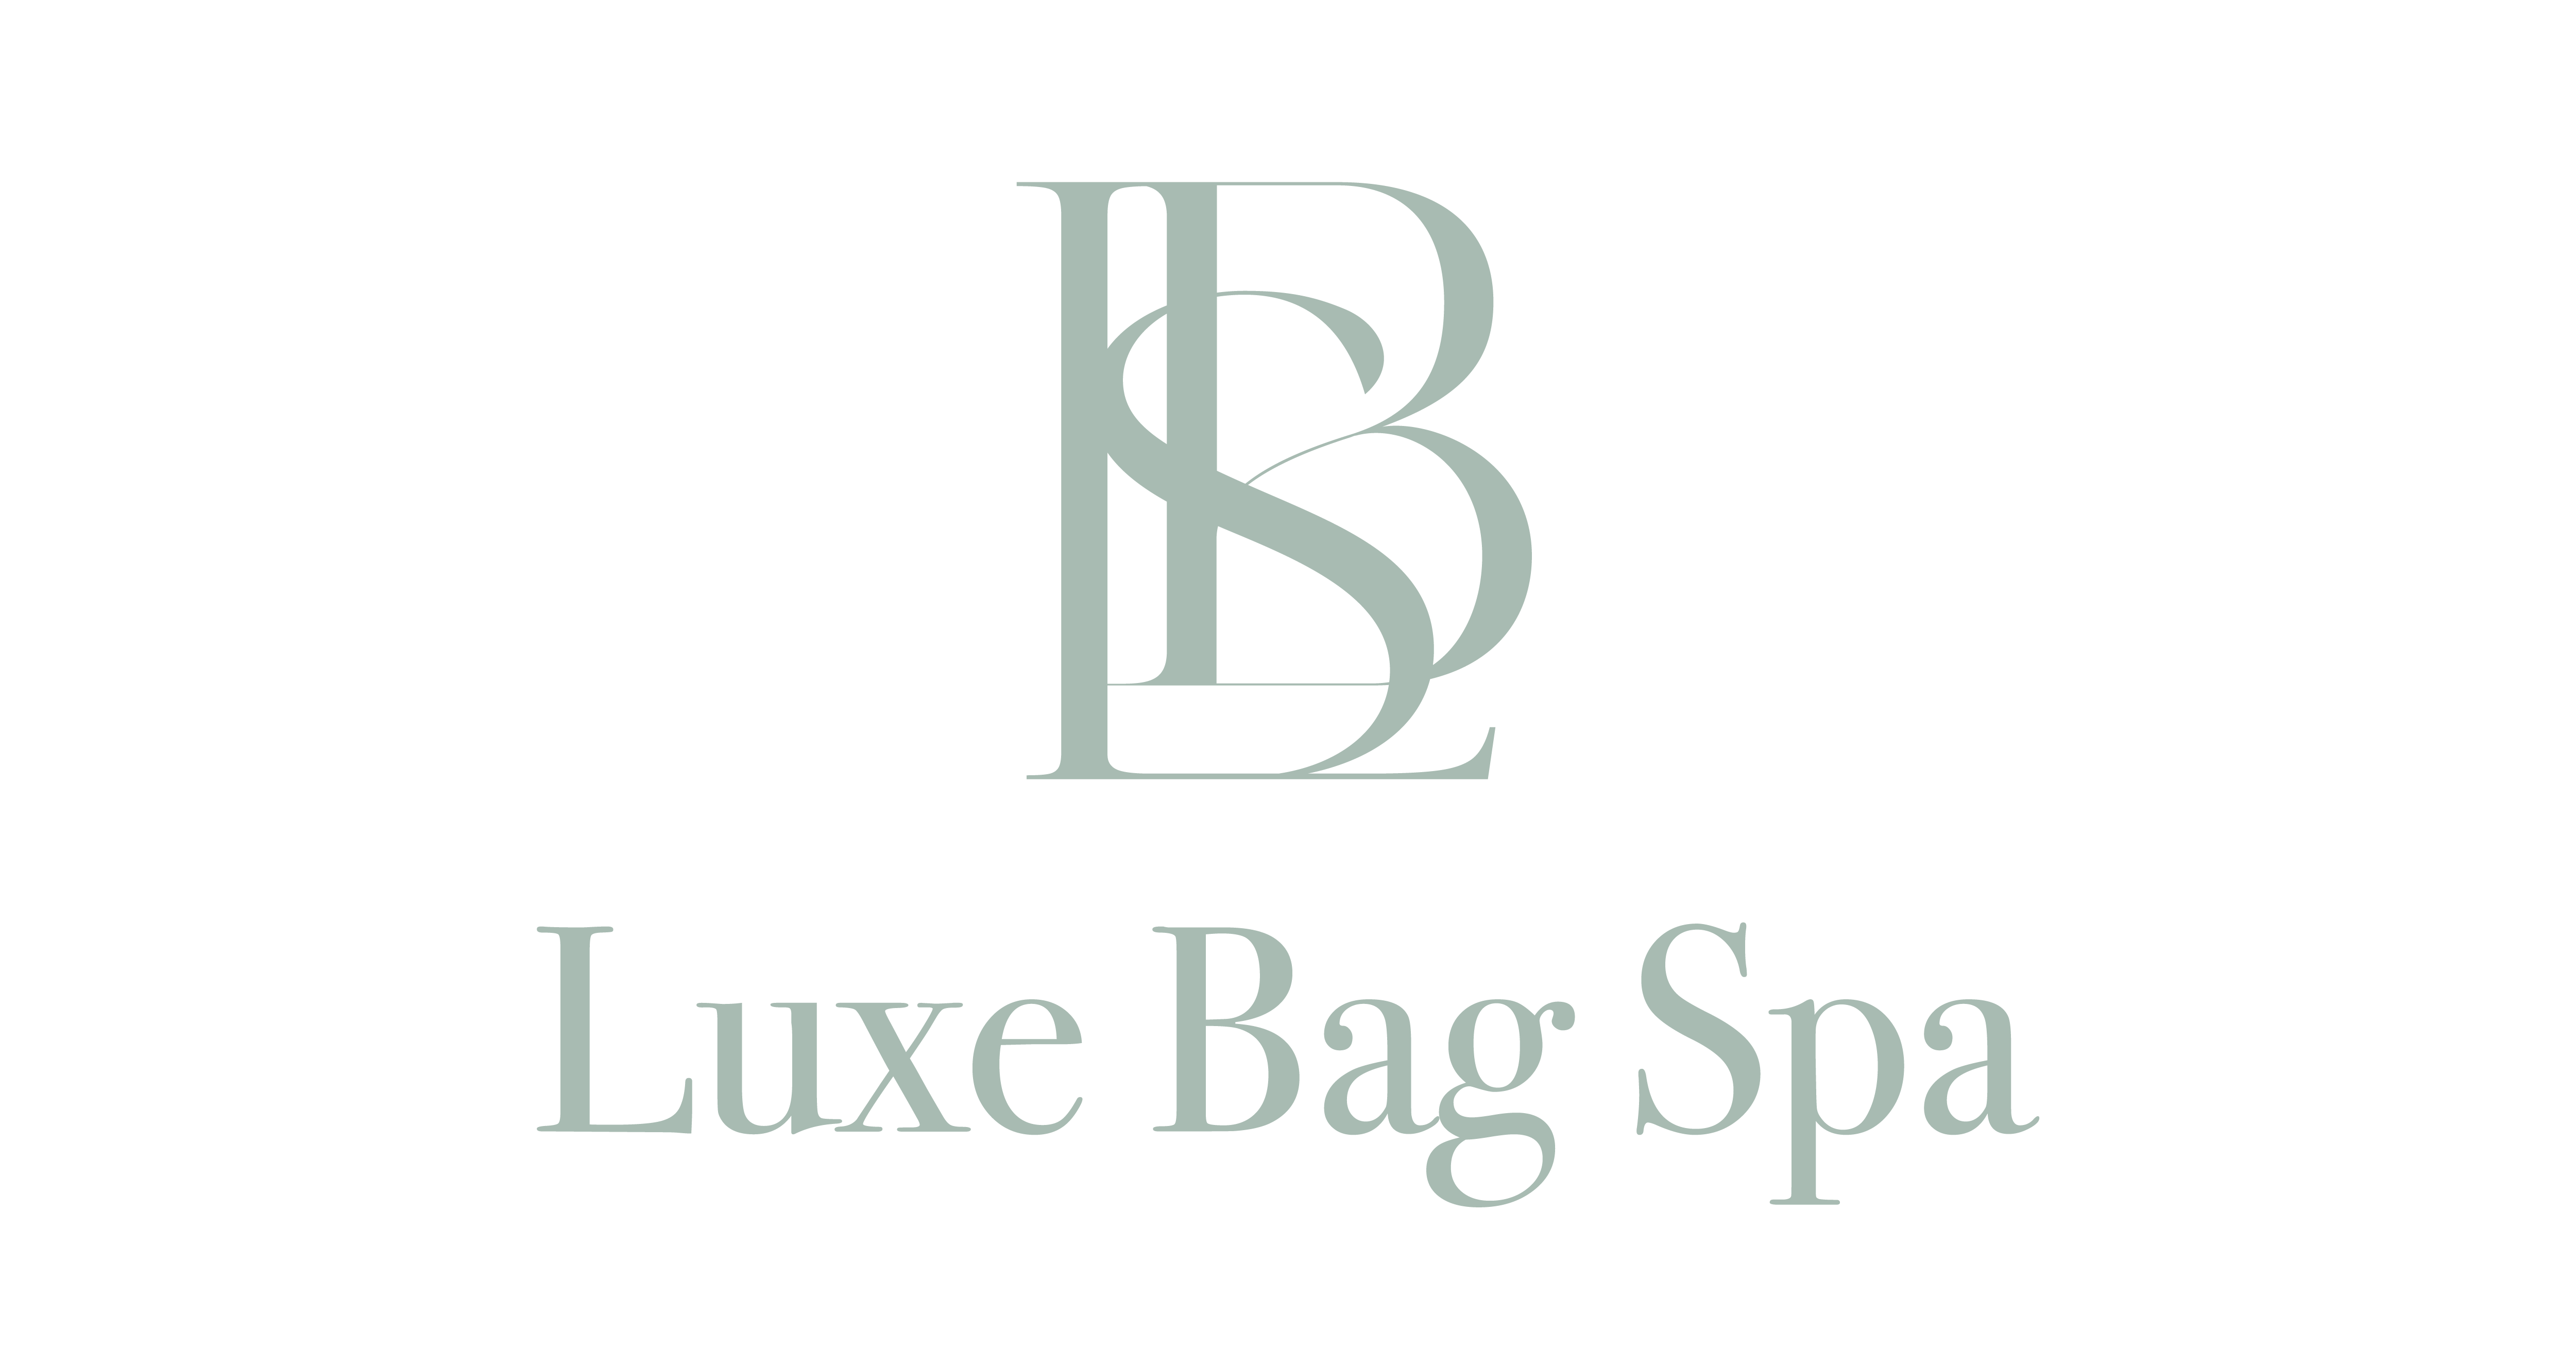 Luxe Bag Spa - Service/ Business - Luxe Bag Spa